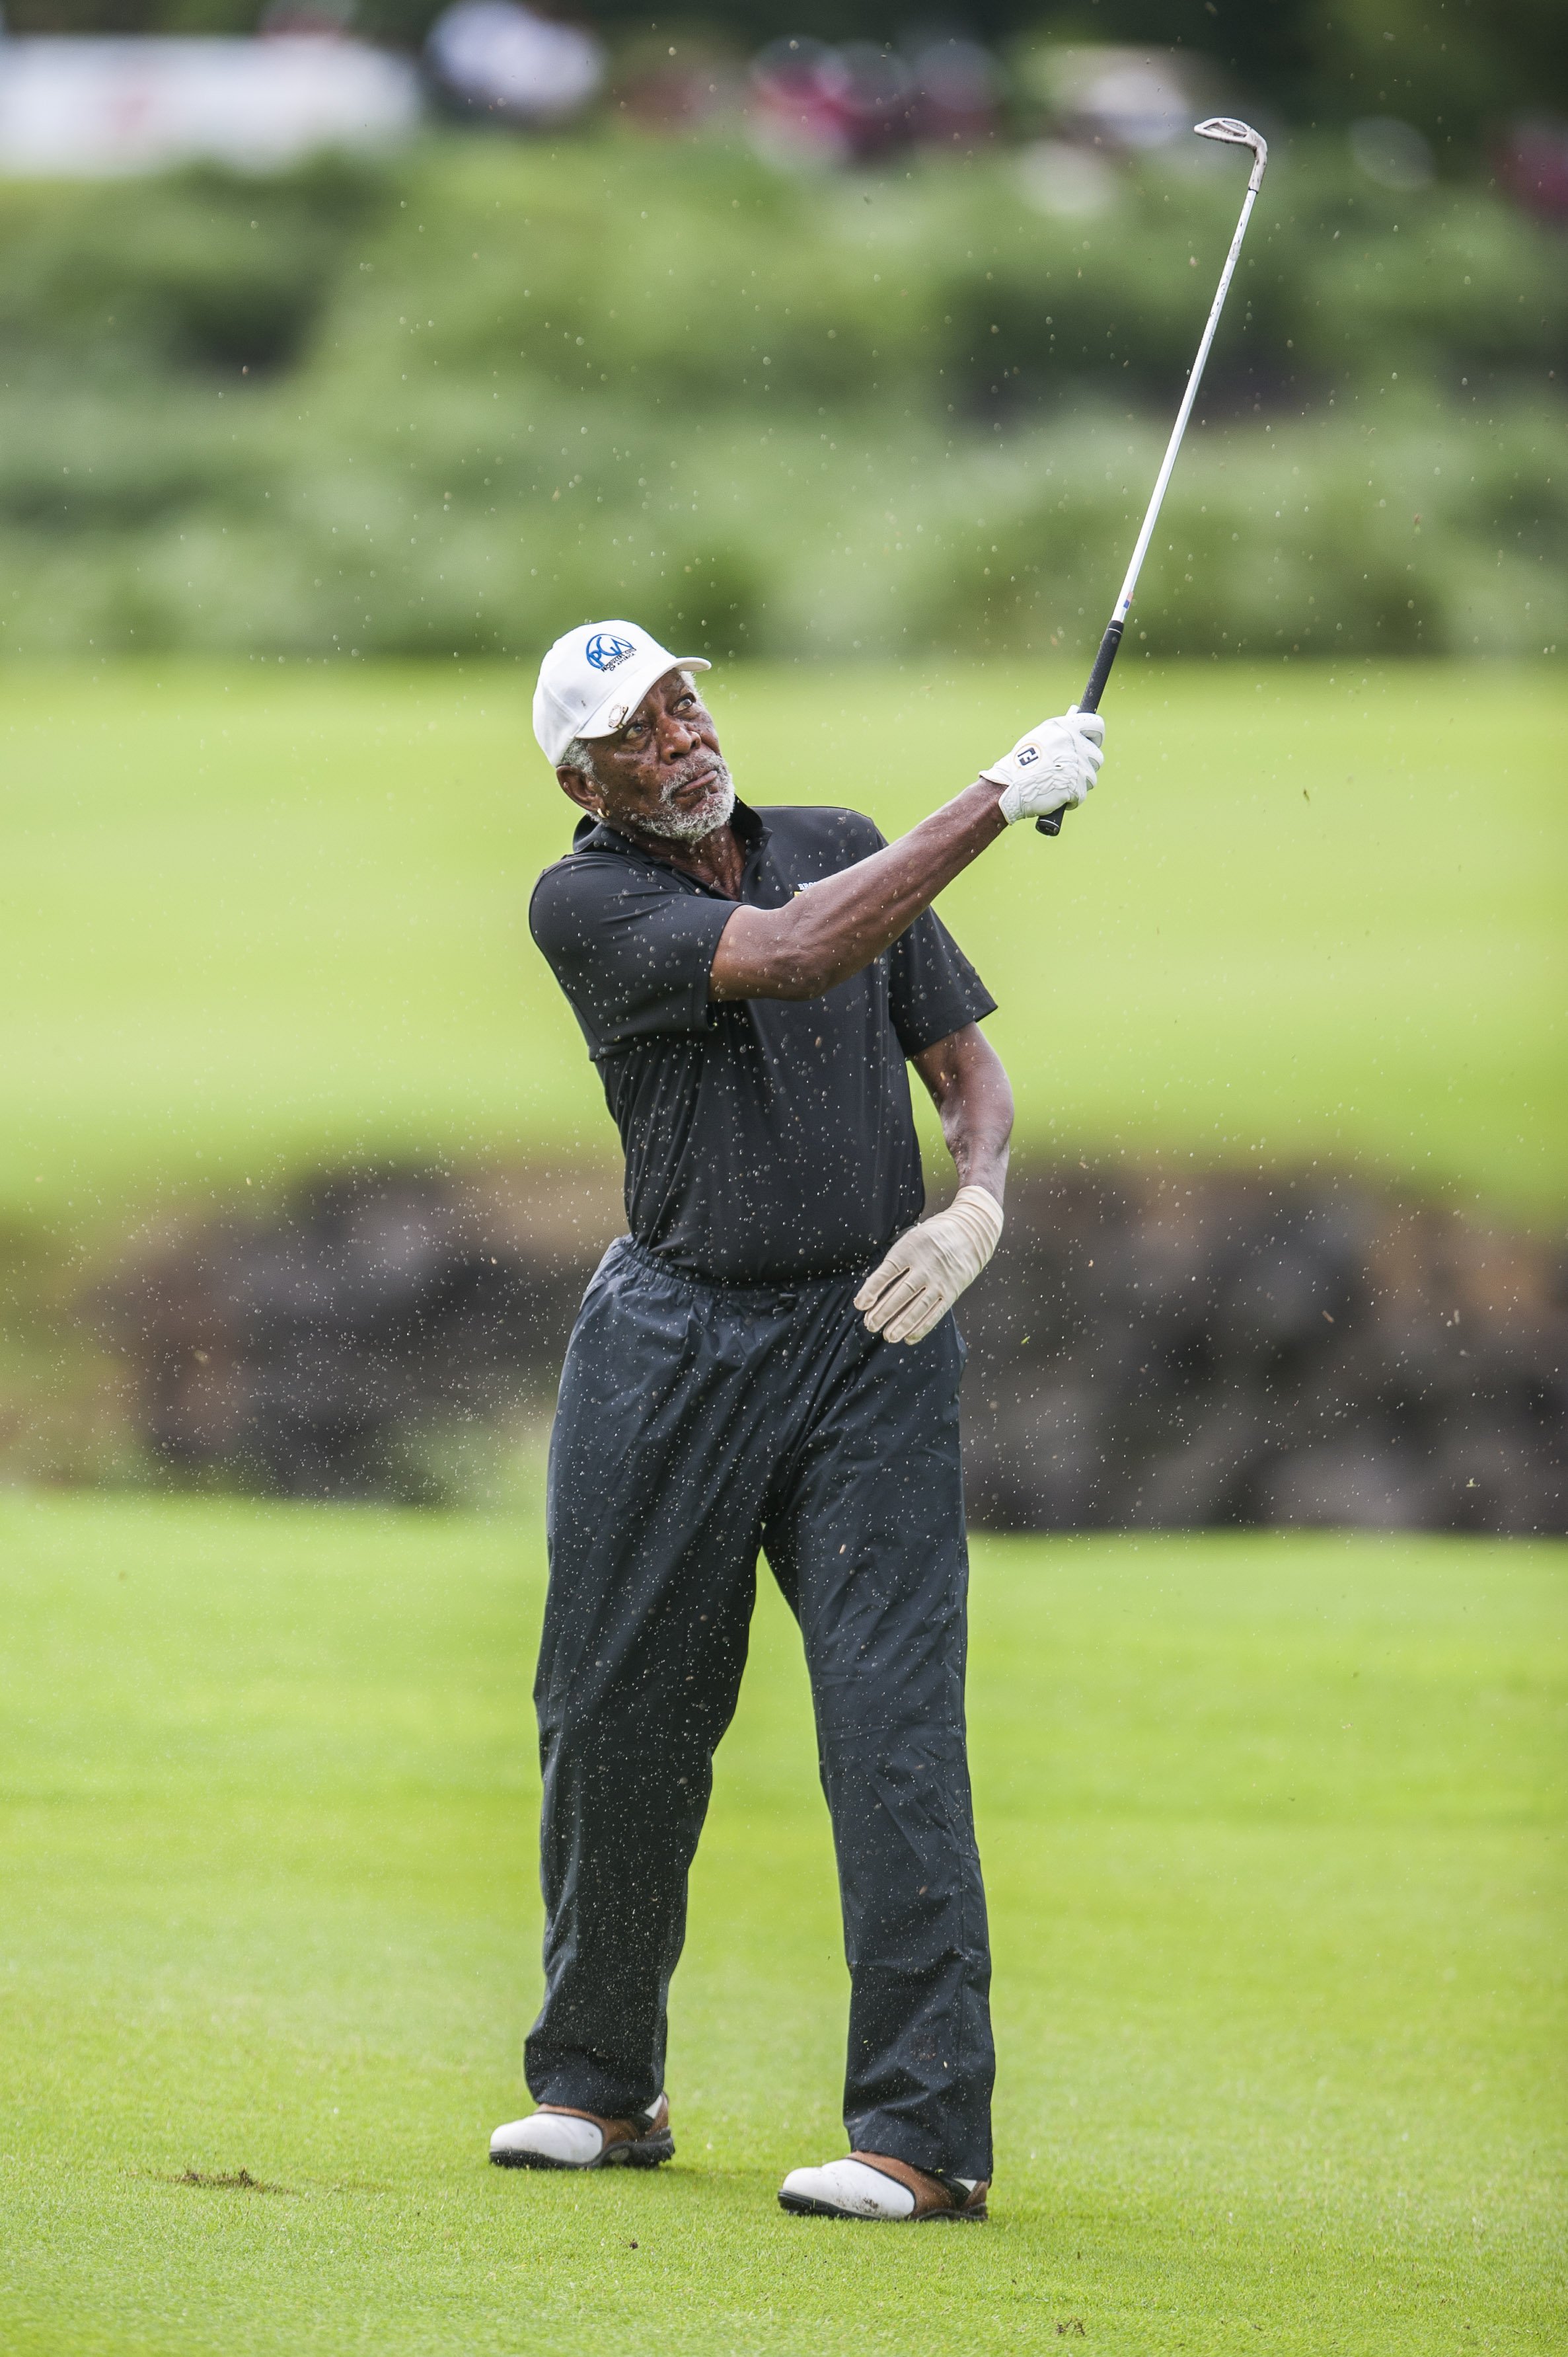 Morgan Freeman during the Mission Hills Celebrity Pro-Am on 26 October 2014, in Haikou, China. | Source: Power Sport Images/Getty Images